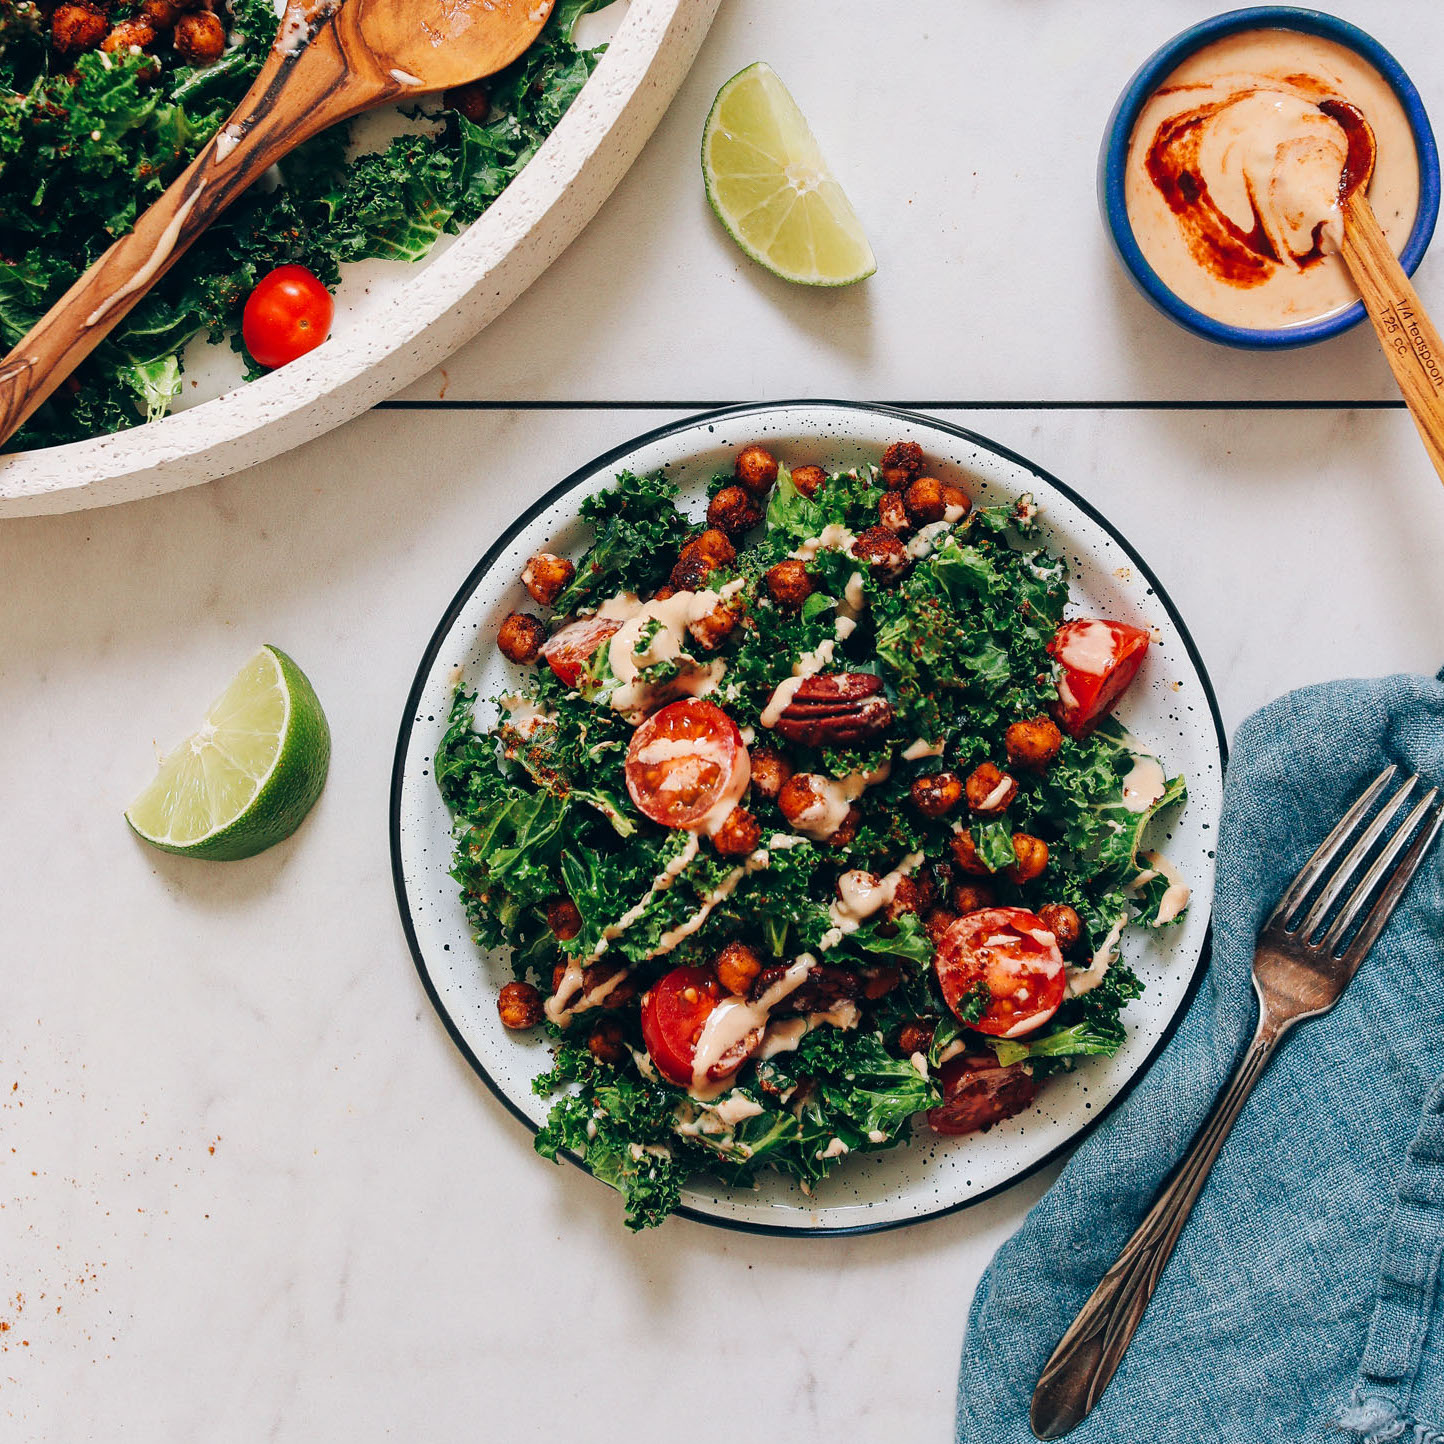 Plate of Chopped Kale Salad with chickpeas and Adobo Dressing